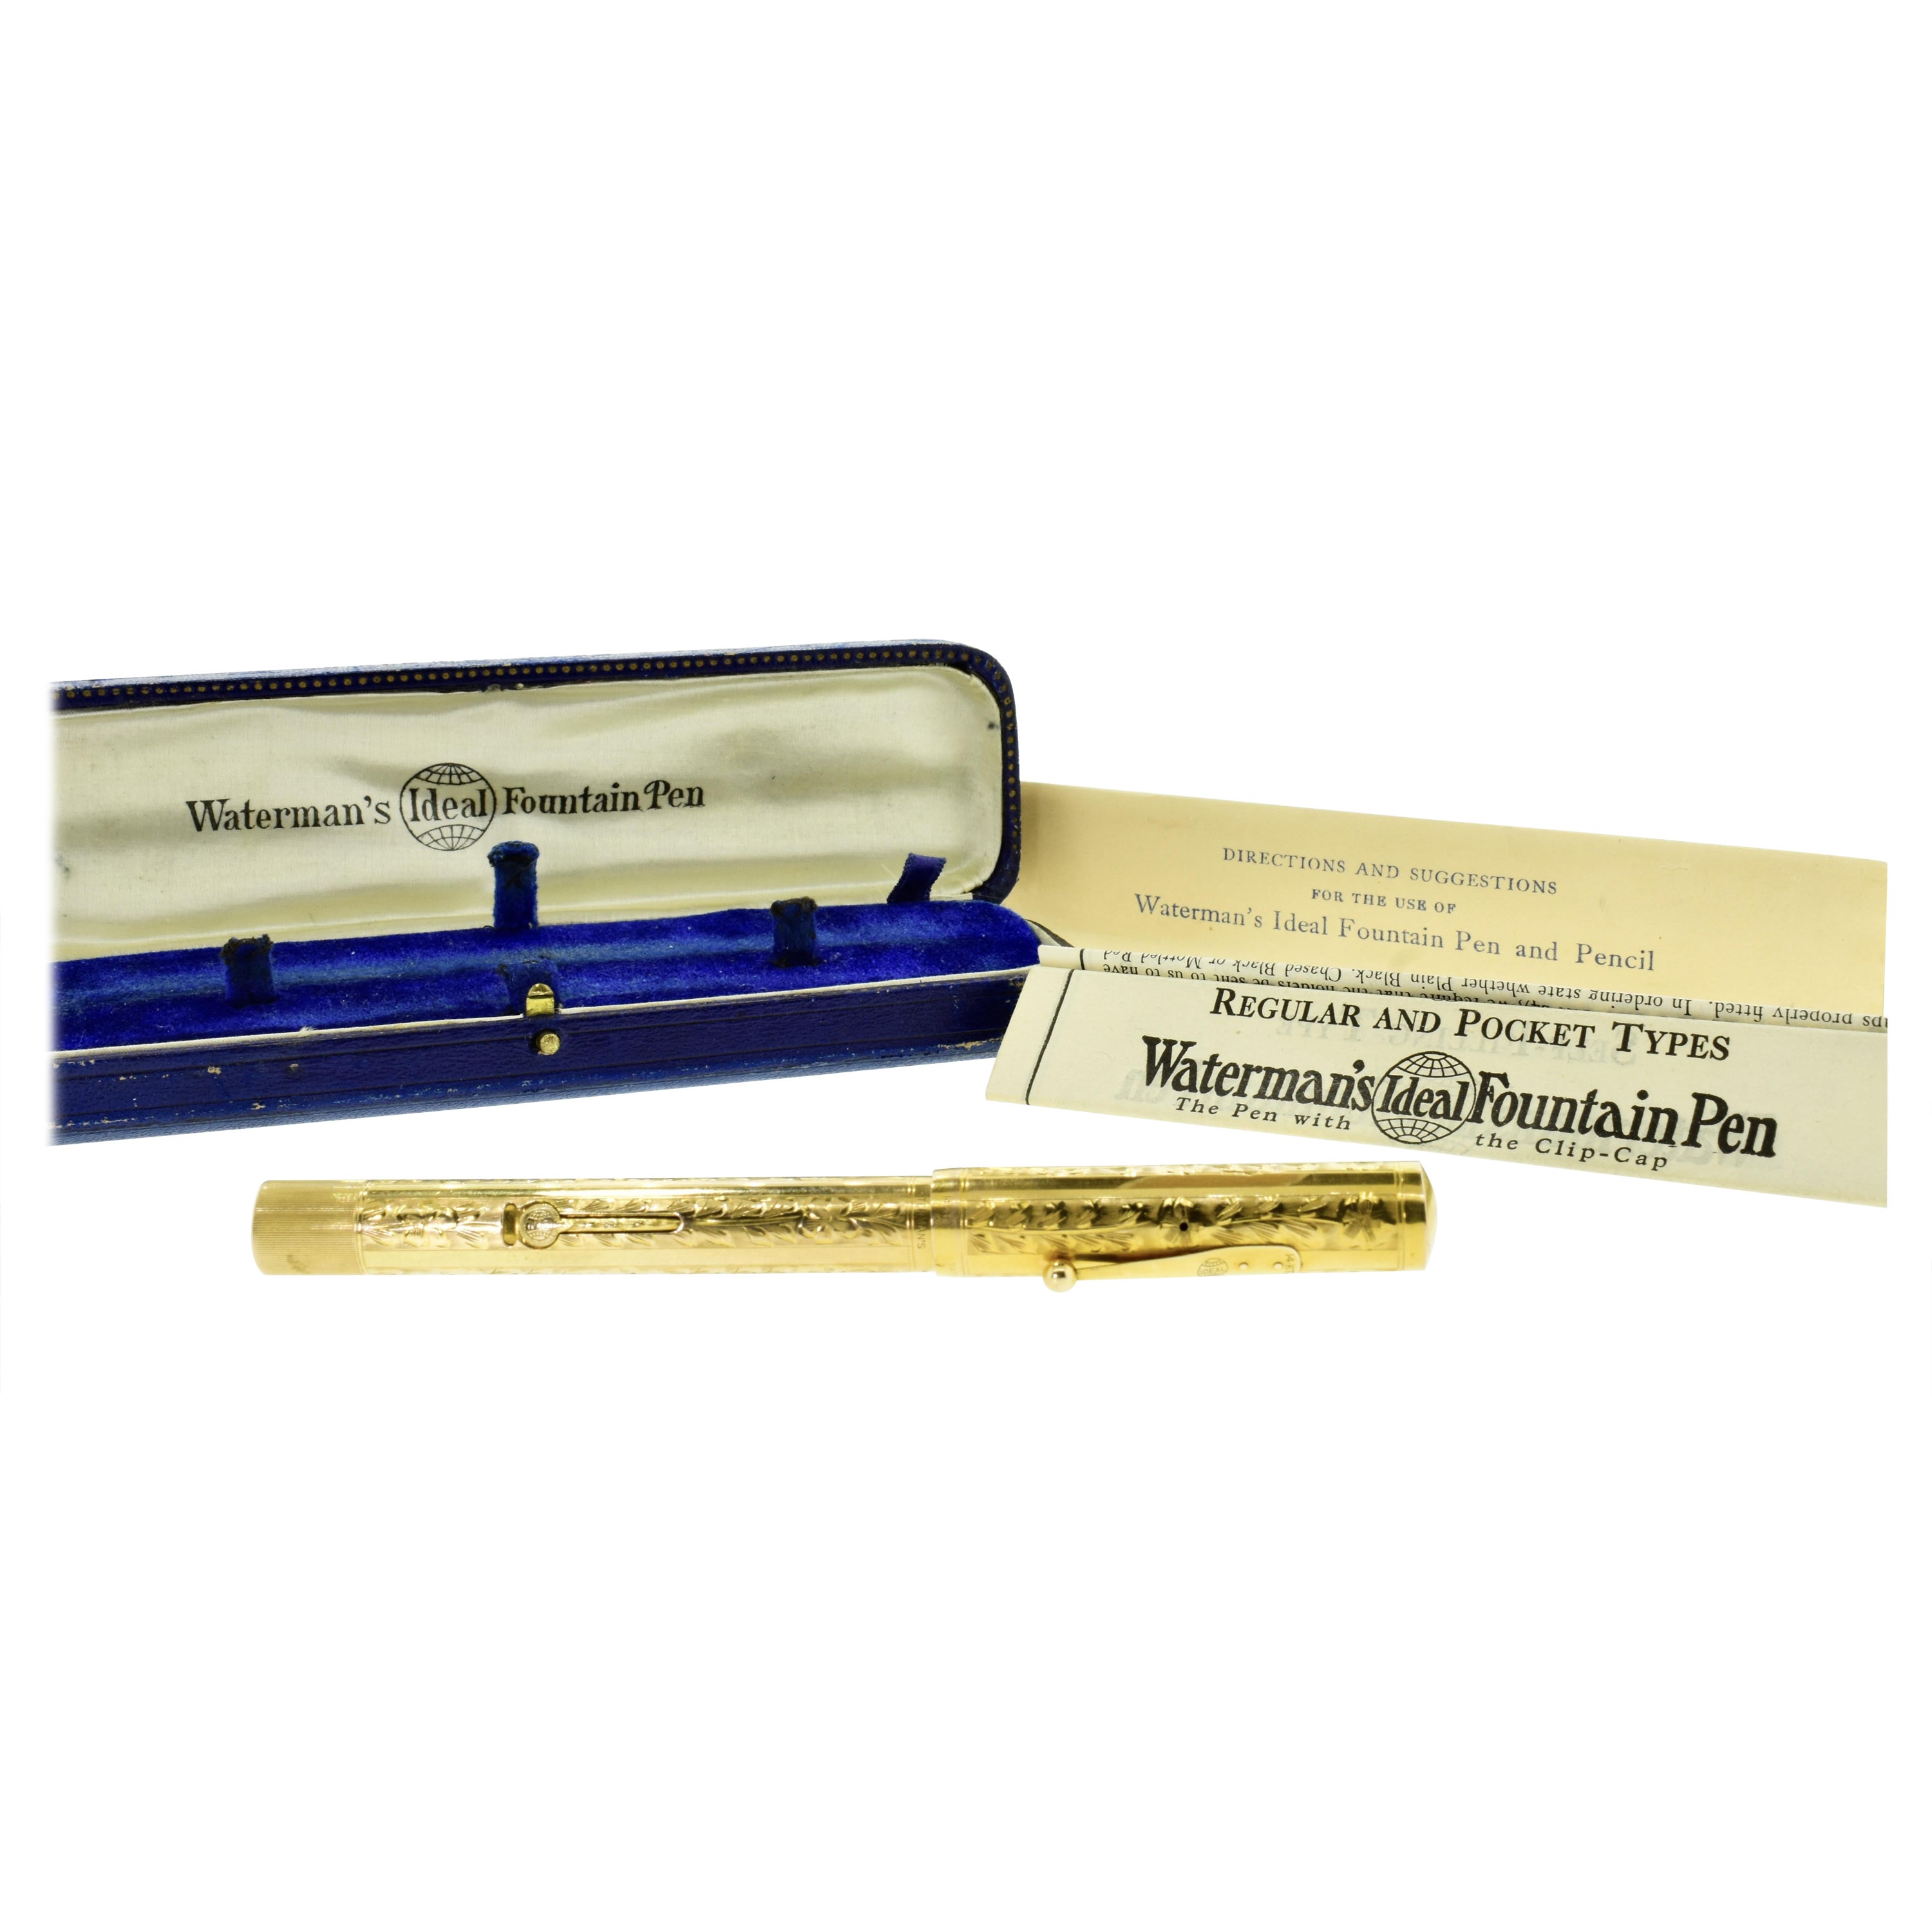 Waterman's 14K Fountain Pen with Original Box and Papers, c. 1915. For Sale